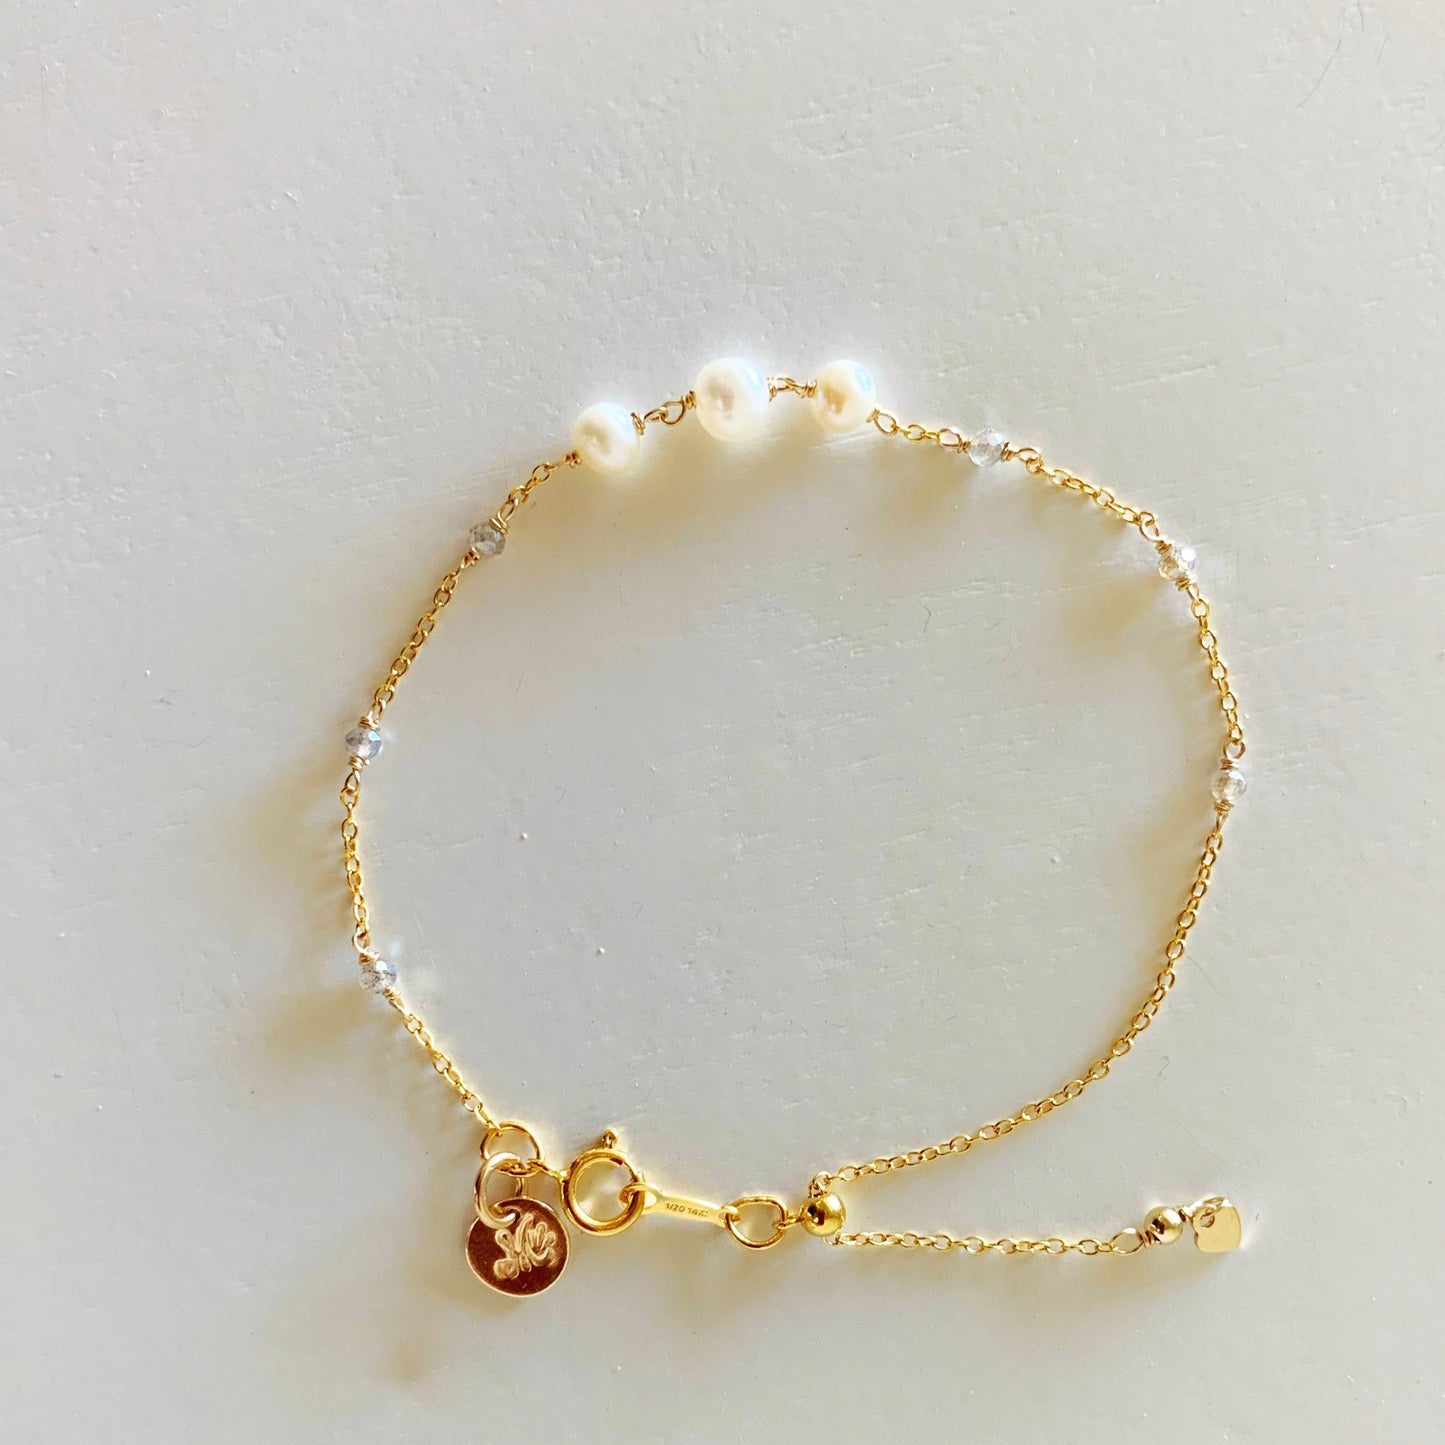 the westport bracelet by mermaids and madeleines is an adjustable style bracelet created with 14k gold filled chain and 3 freshwater pearls at the center of the bracelet with tiny microfaceted labradorite beads on the sides of the chain. this bracelet is photographed in full view from the top down on a white surface